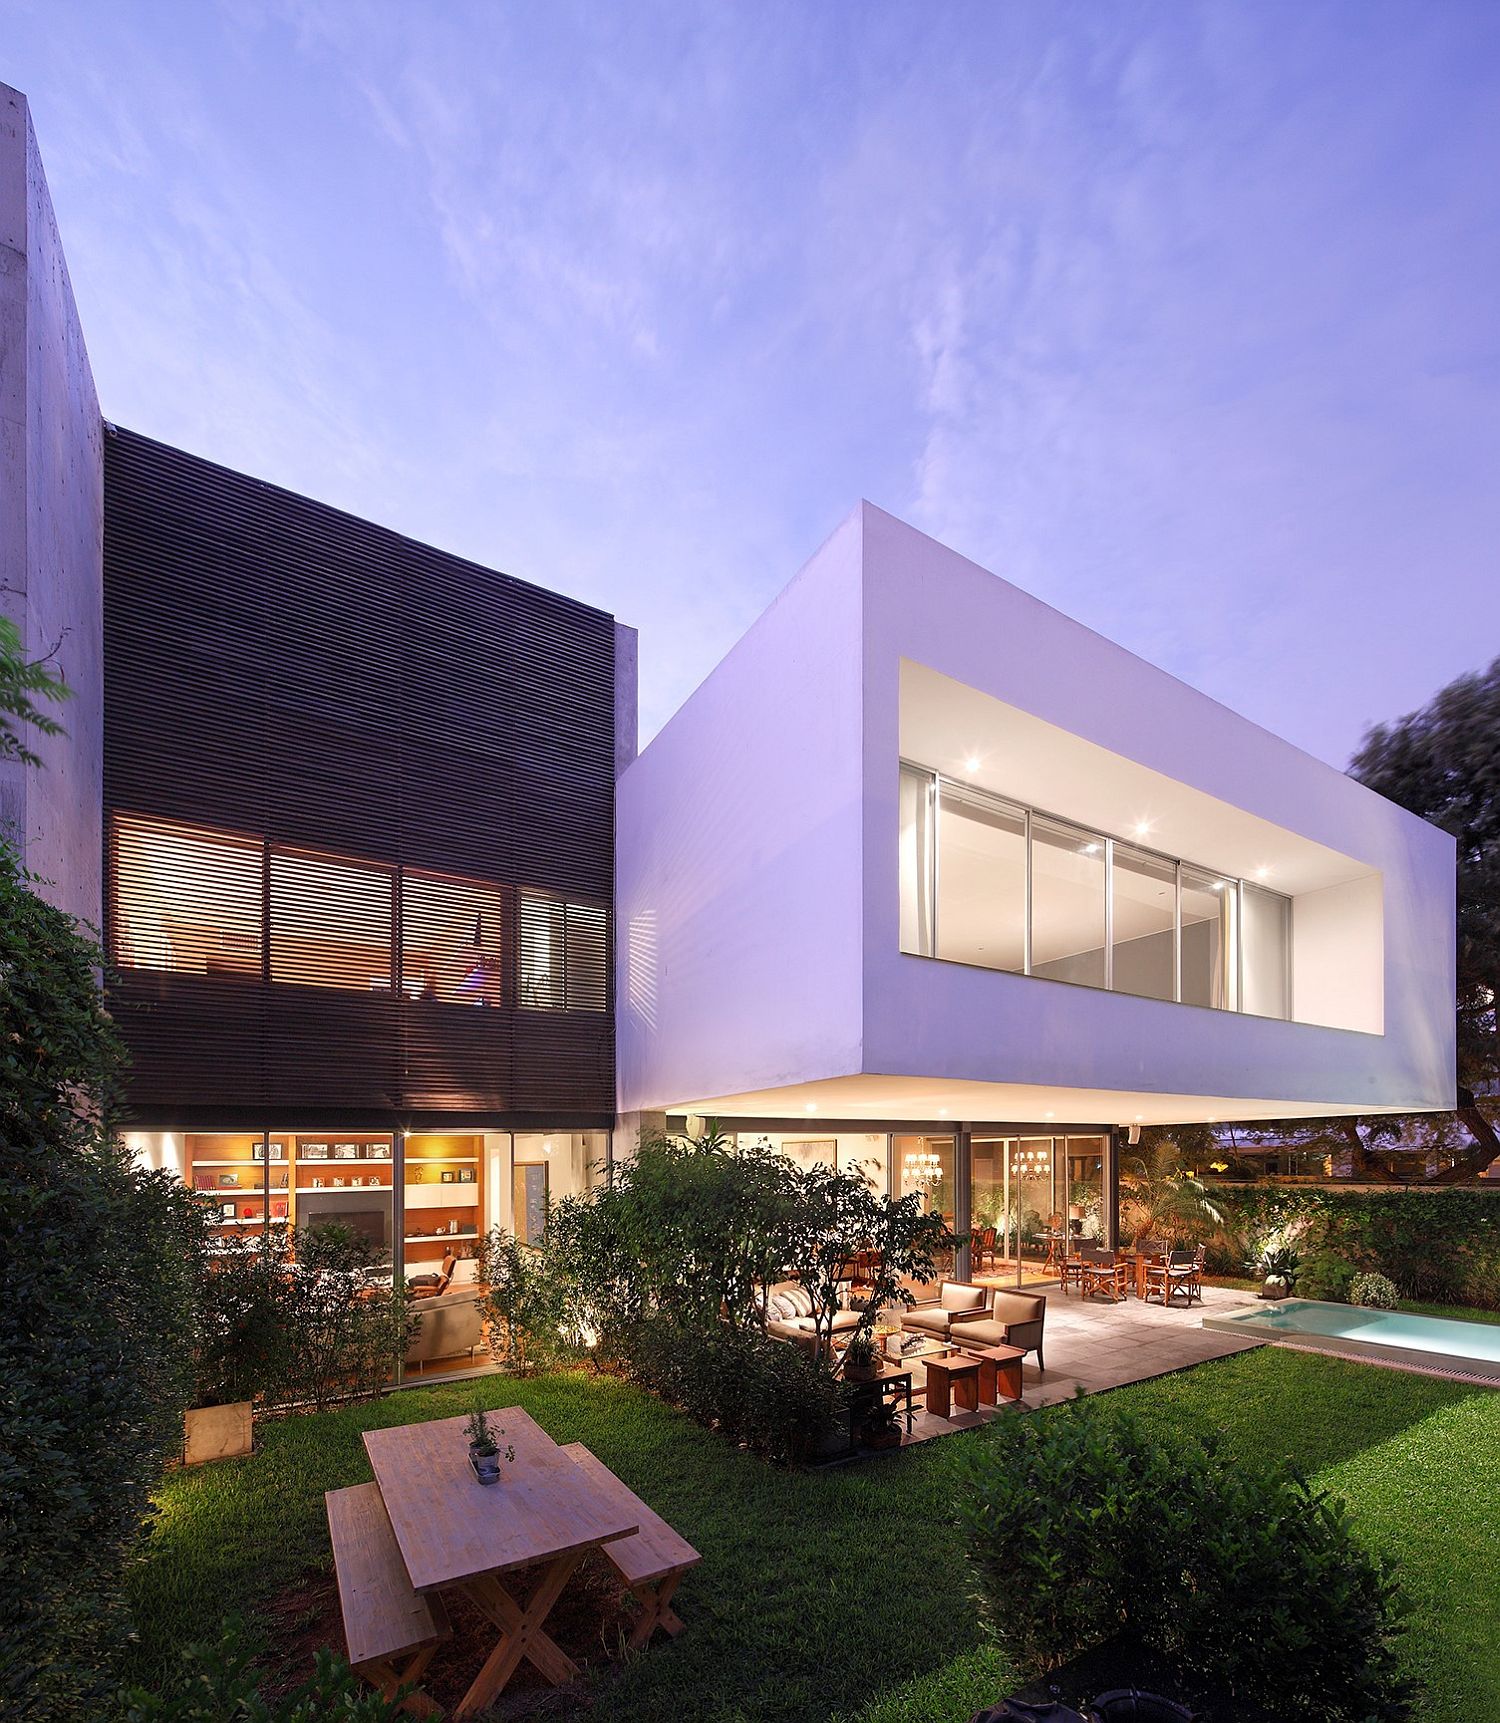 A Study in Crisp Contemporary Design: Exquisite House M in Lima